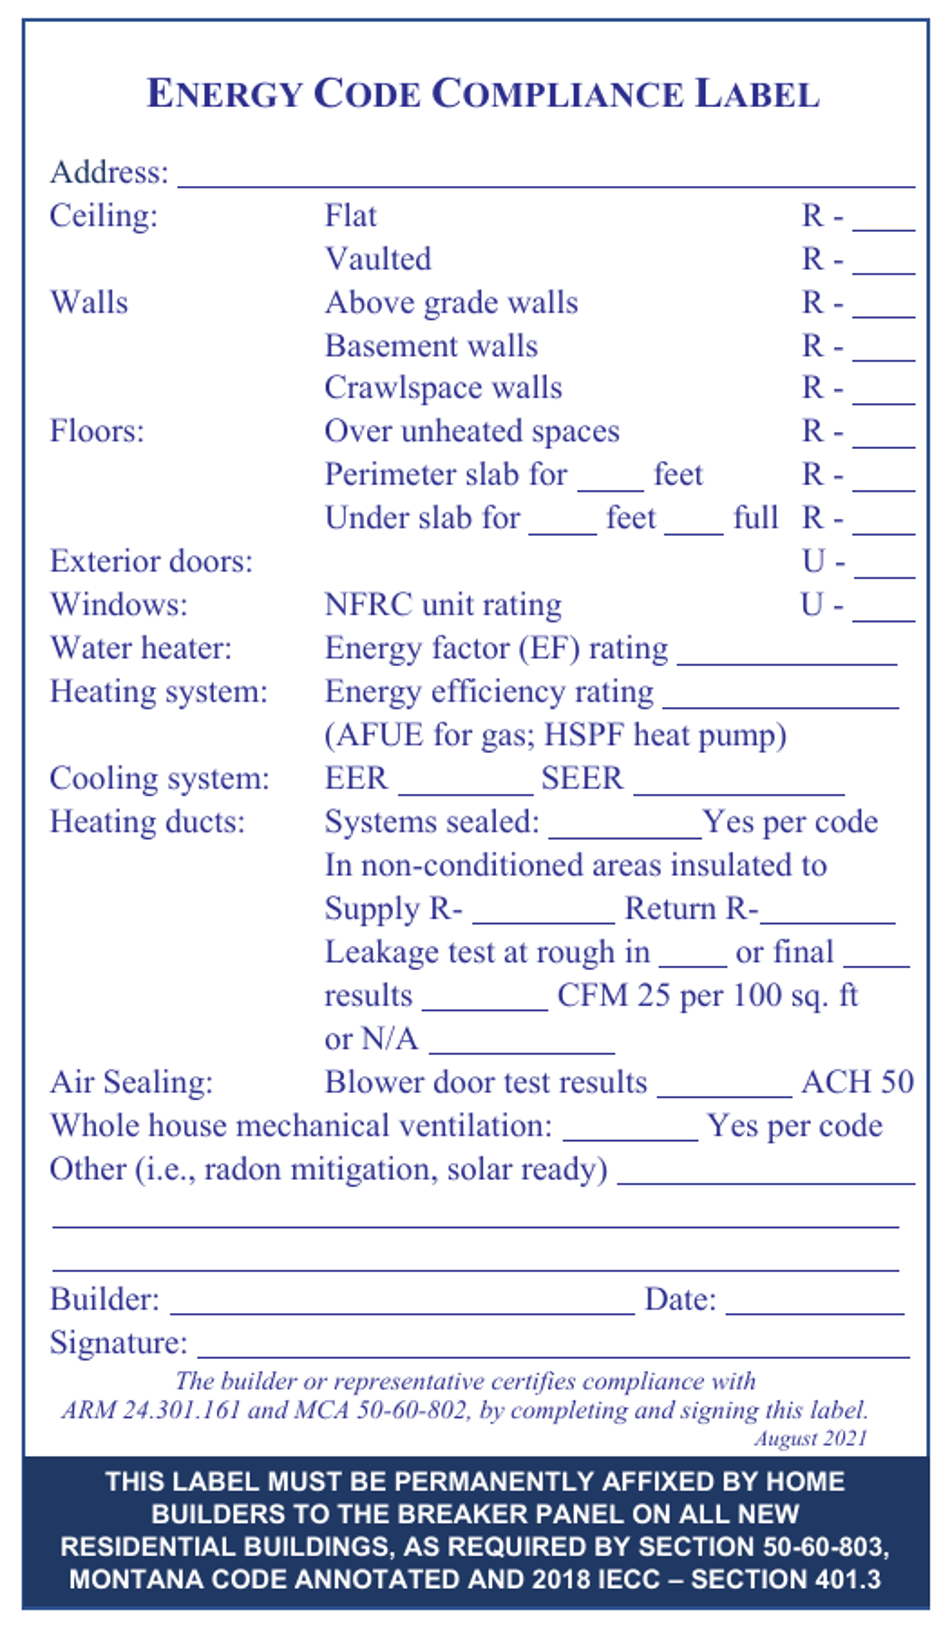 Energy Code Compliance Label - Montana, Page 1